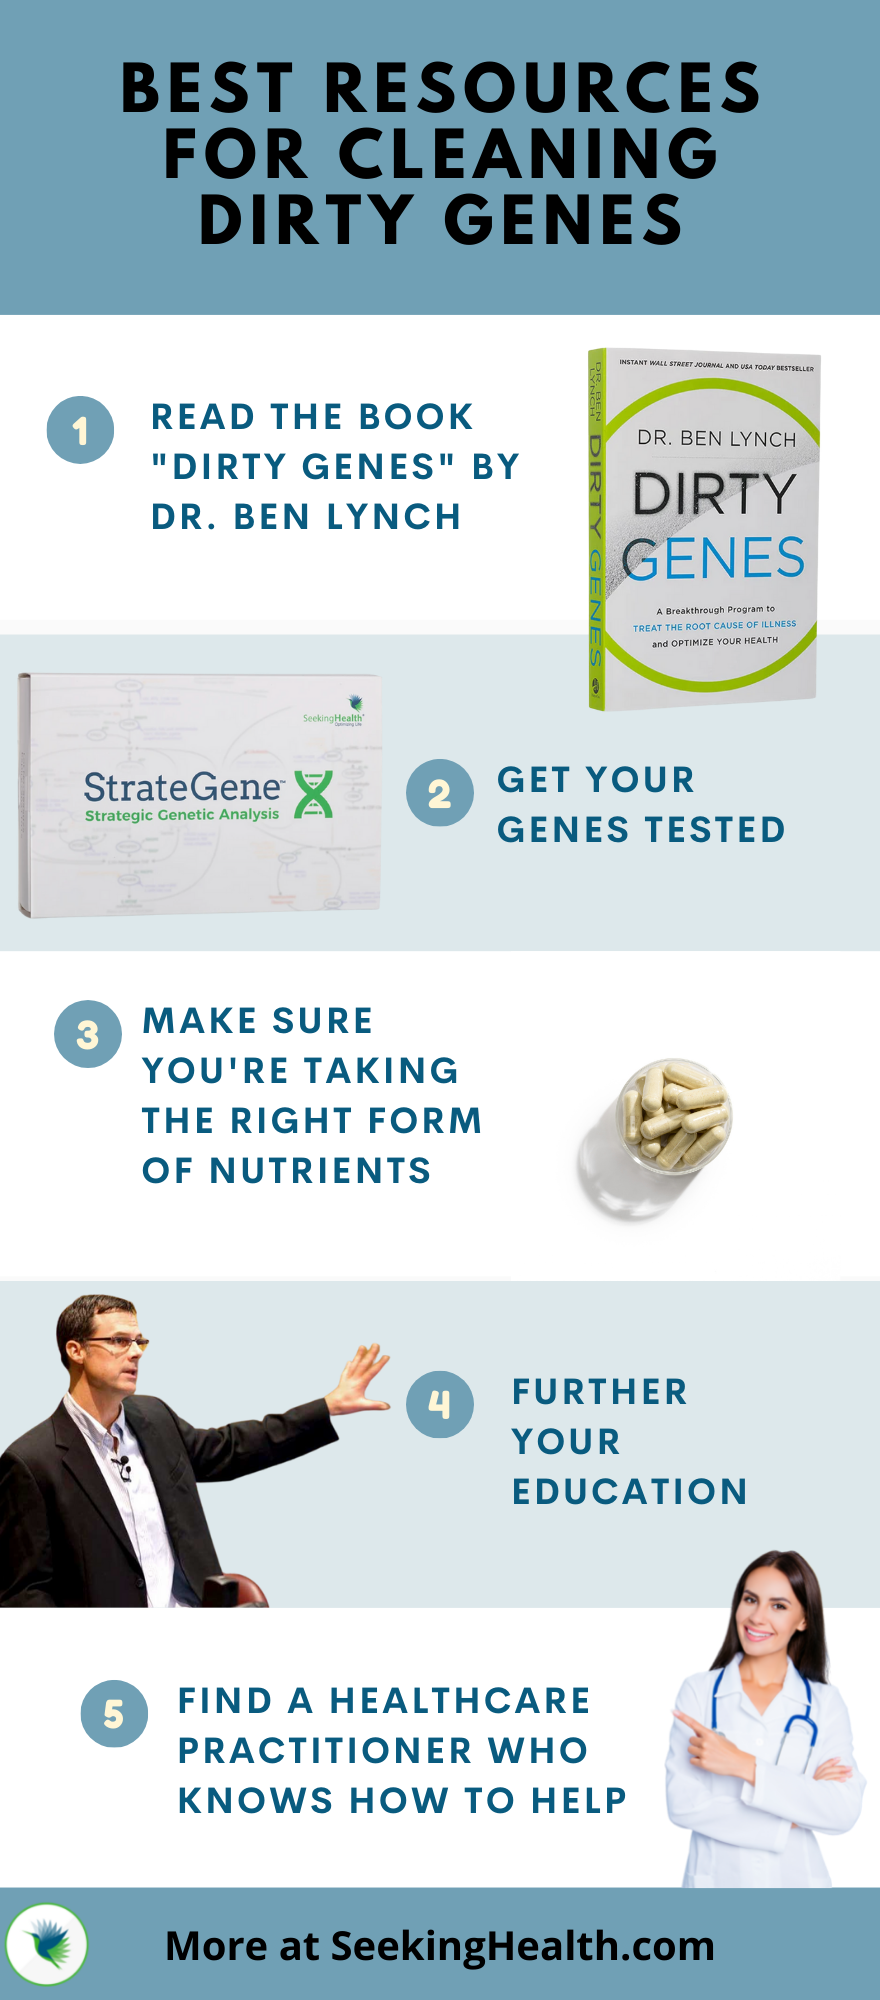 Dirty Genes Infographic